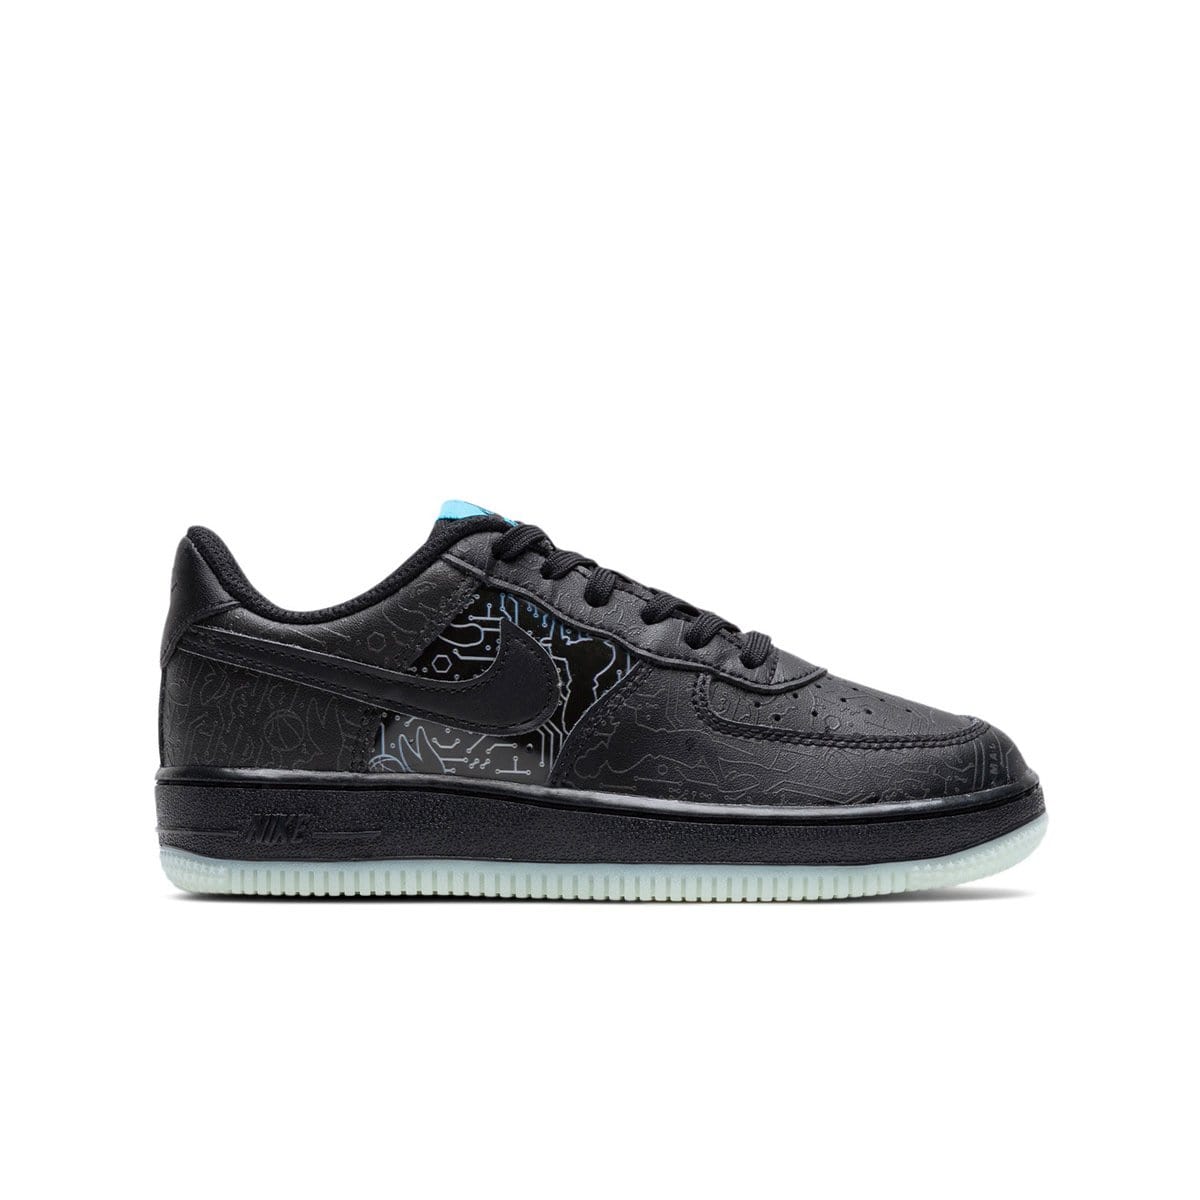 Nike Casual AIR FORCE 1 (PS) "Space Jam"